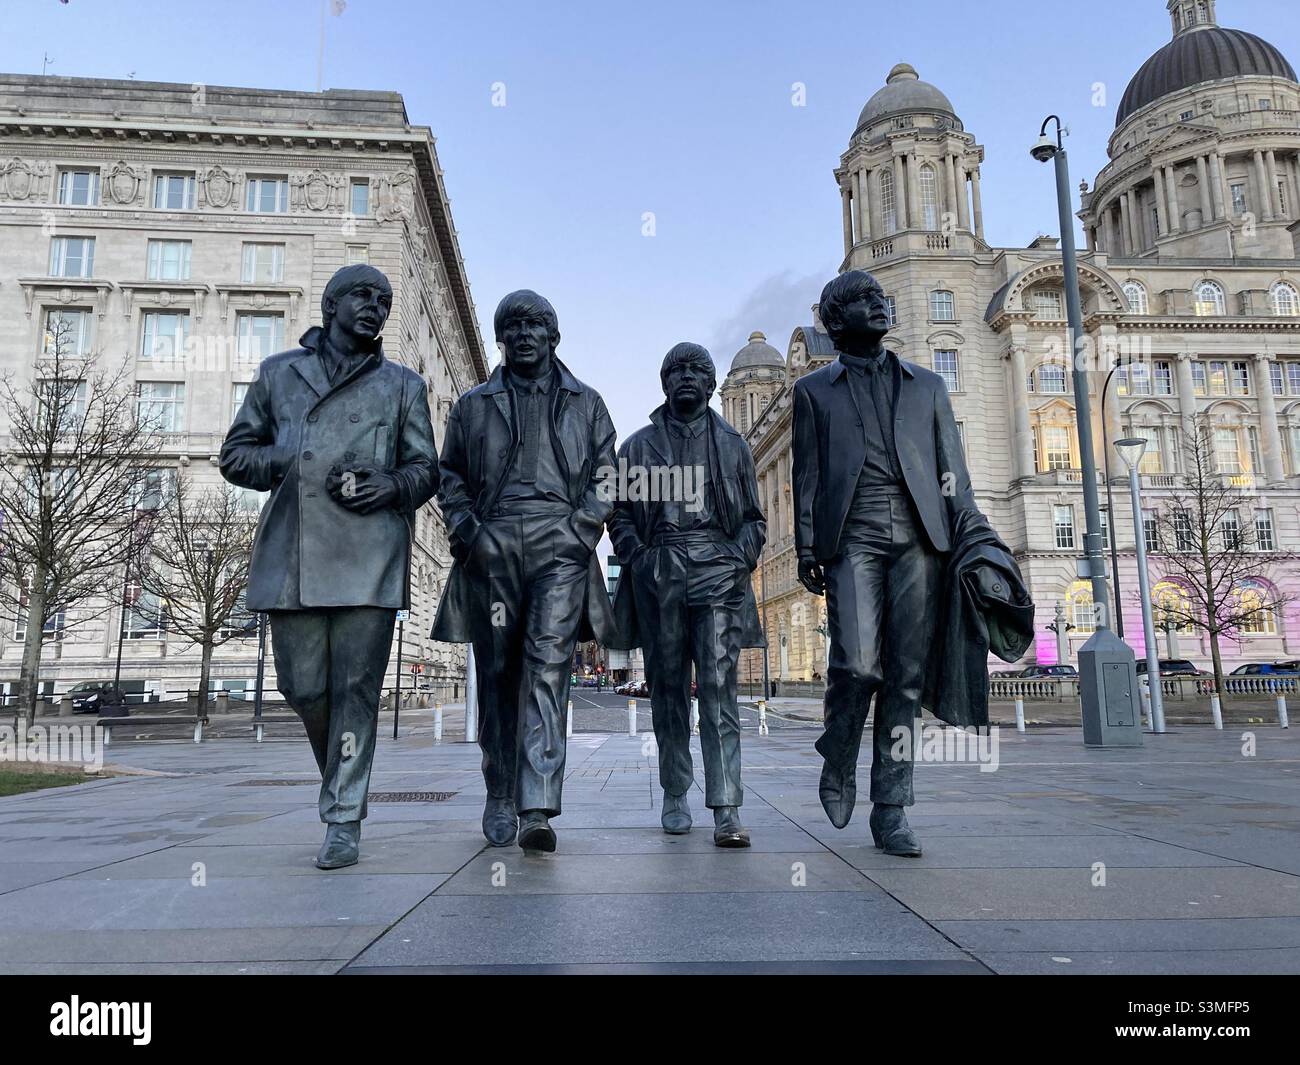 The Beetles statue in Liverpool, UK Stock Photo